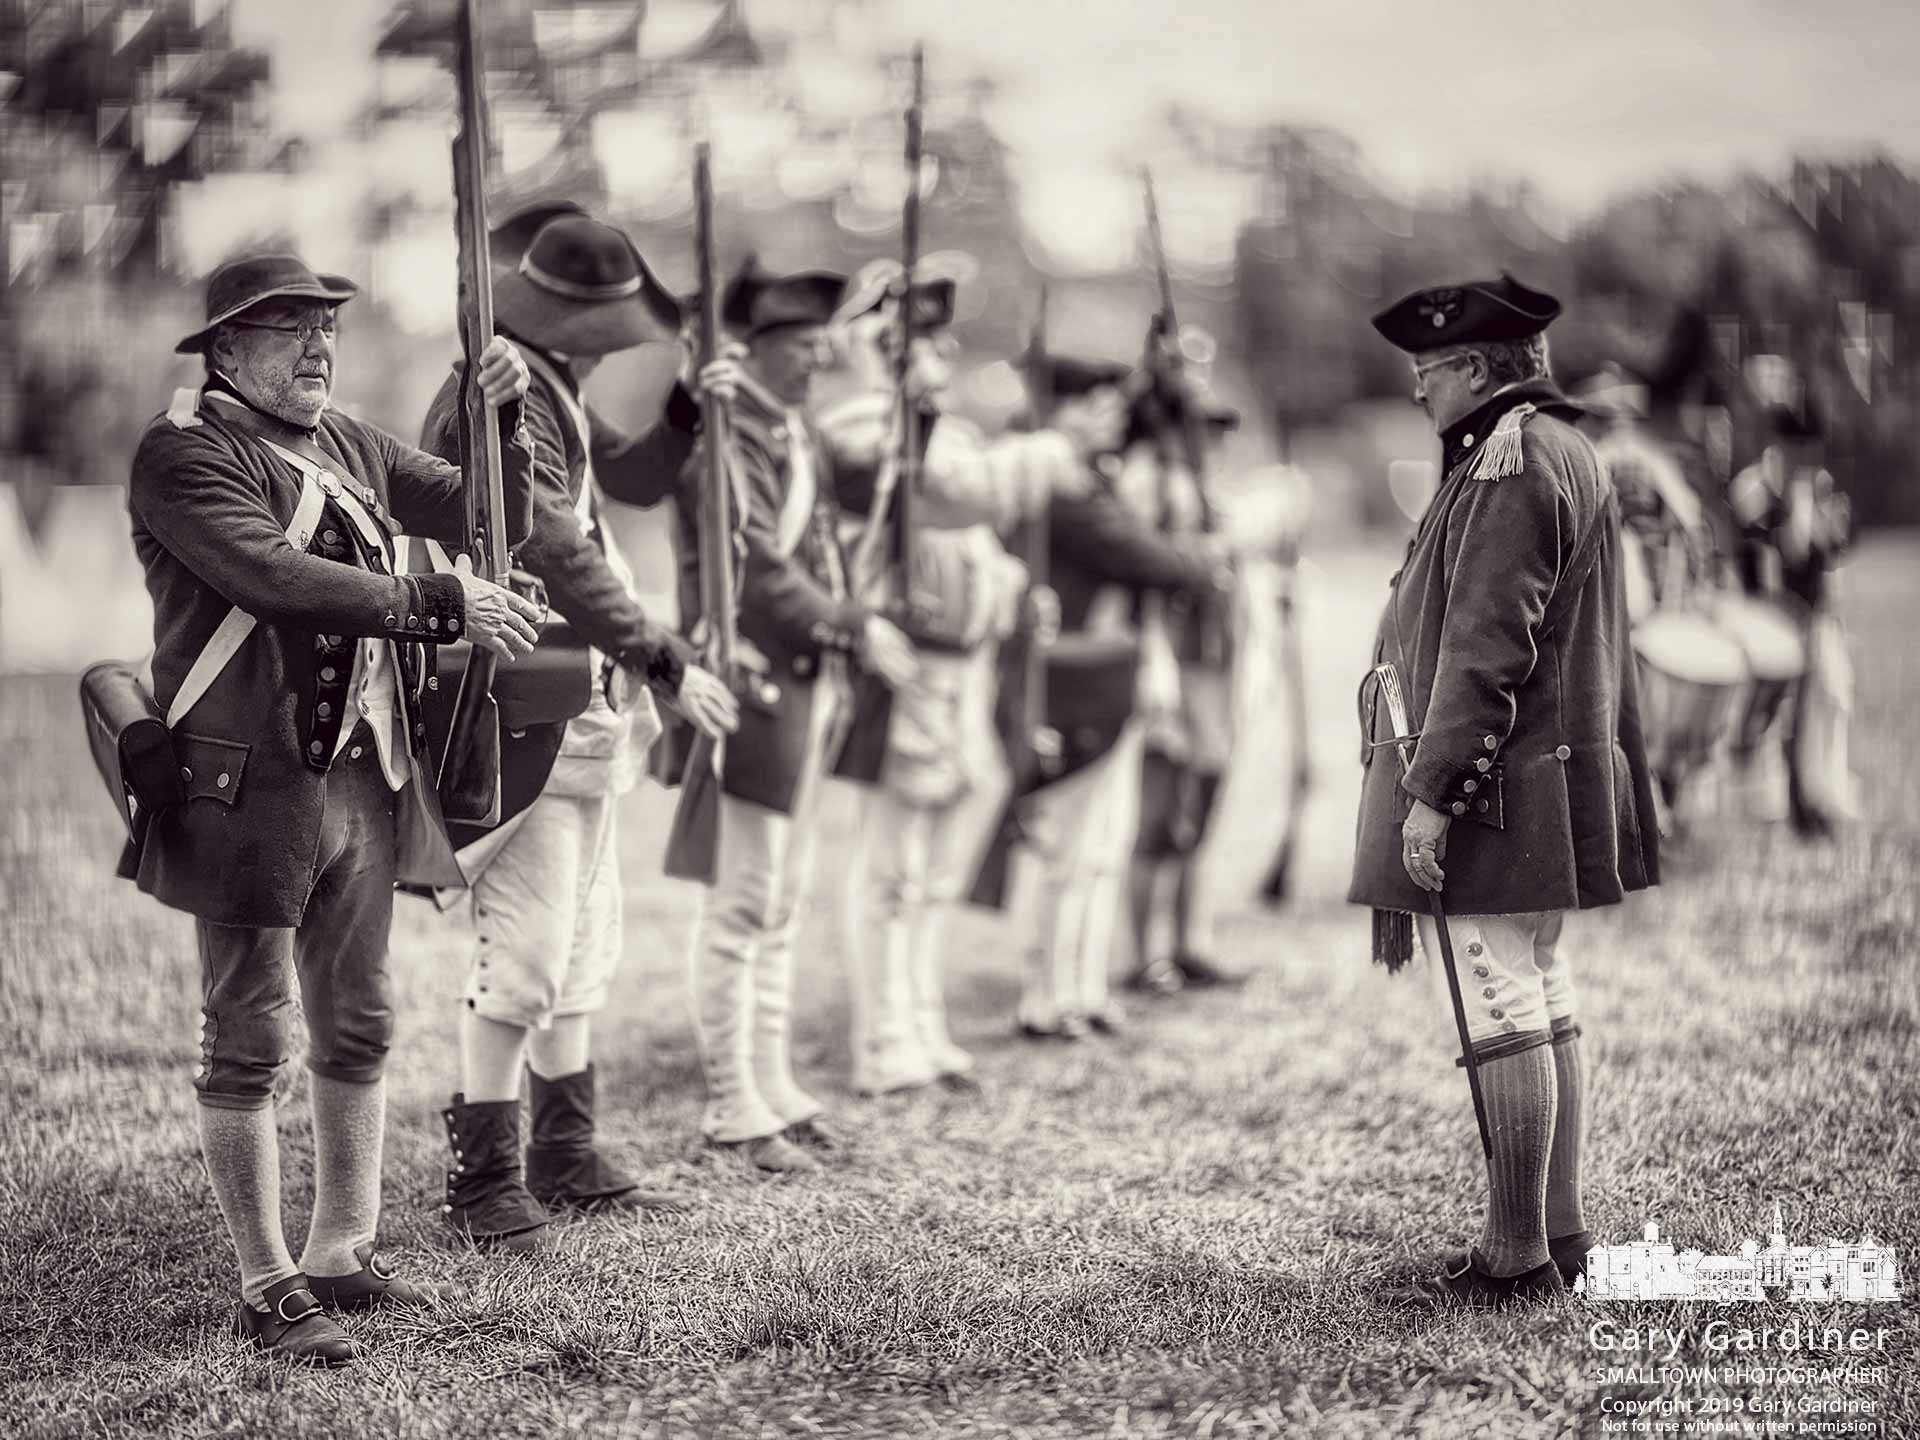 Revolutionary War reenactors move into the "present arms" position for the small crowd that gathered after morning rain at Heritage Park in Westerville for the first of two days of reenactments of soldiers battles, cannon fire, a physician explaining his methods, and the company cook preparing pork over an open fire. My Final Photo for Sept. 21, 2019.